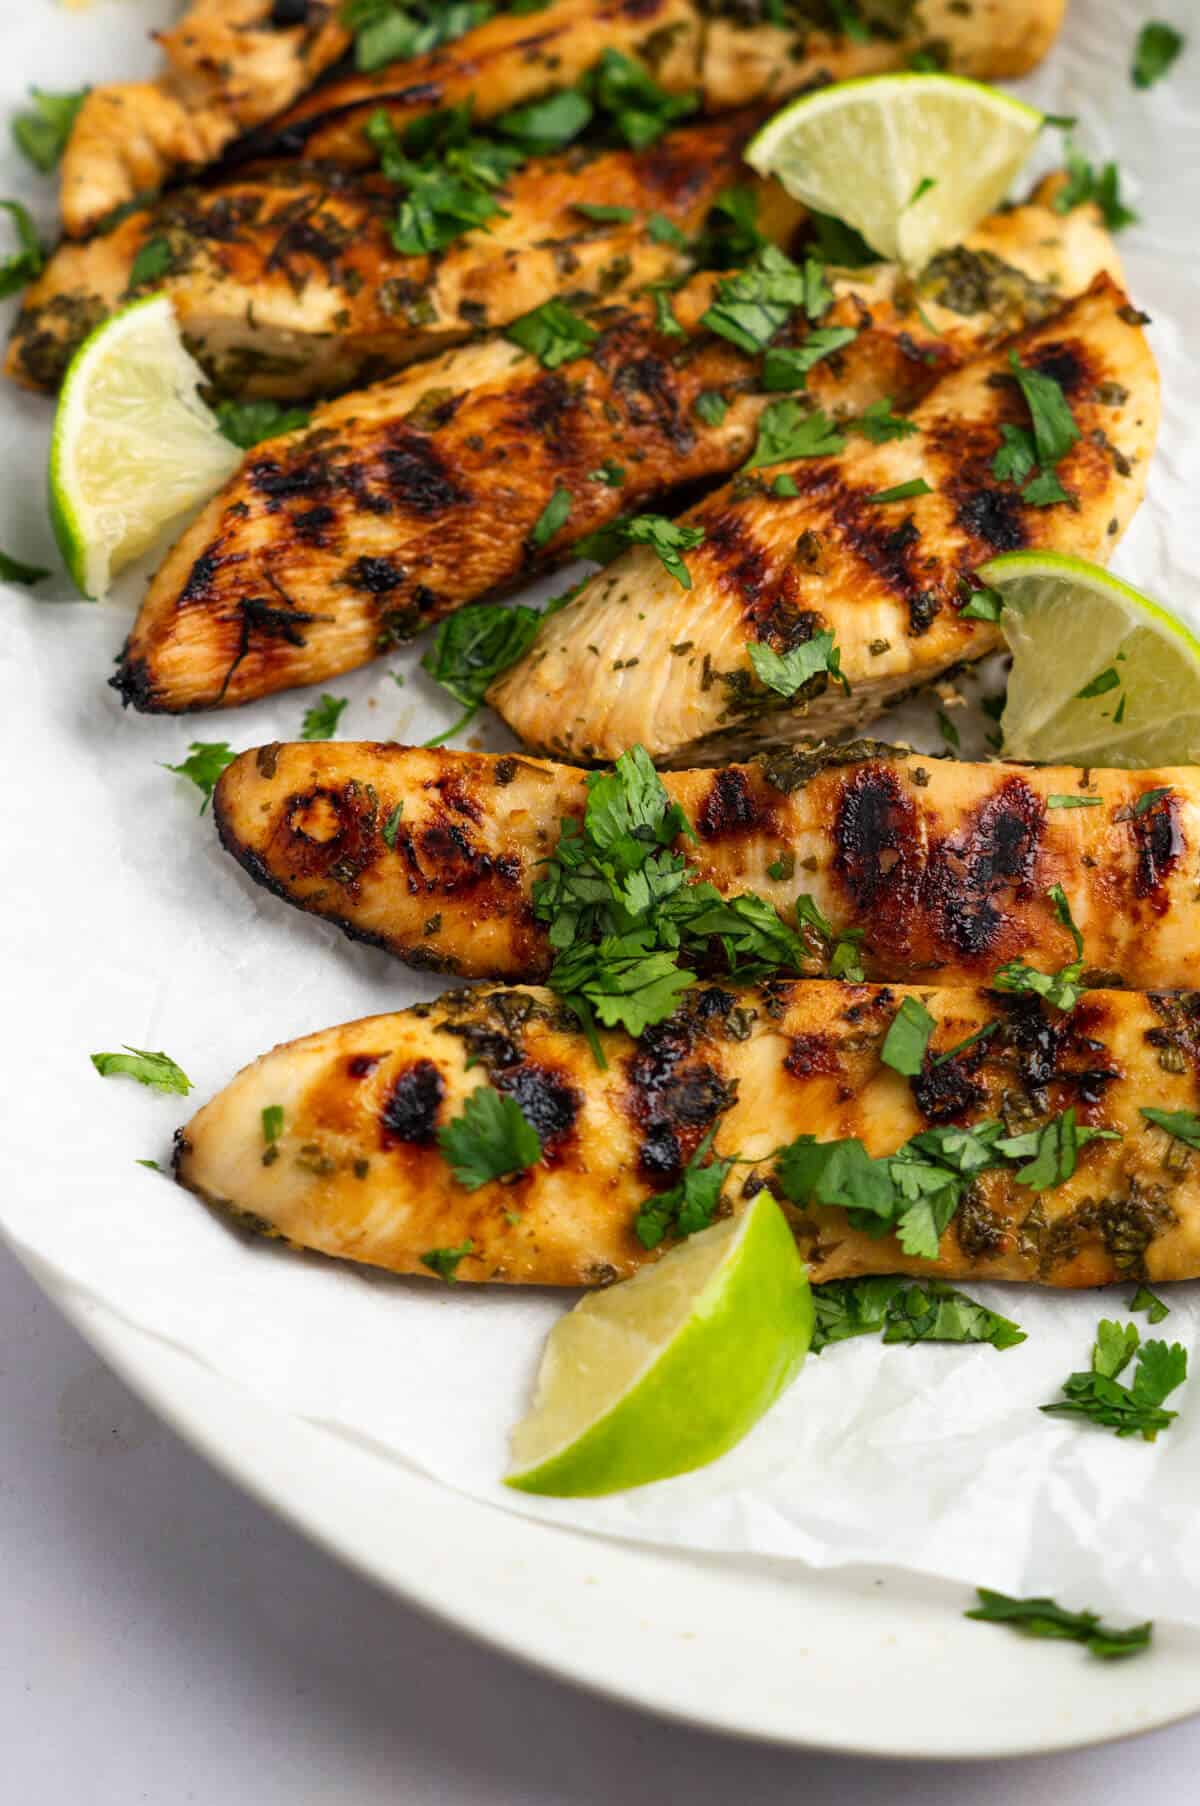 And up close shot of a platter of grilled ginger cilantro chicken with chopped cilantro and lime wedge garnishes.